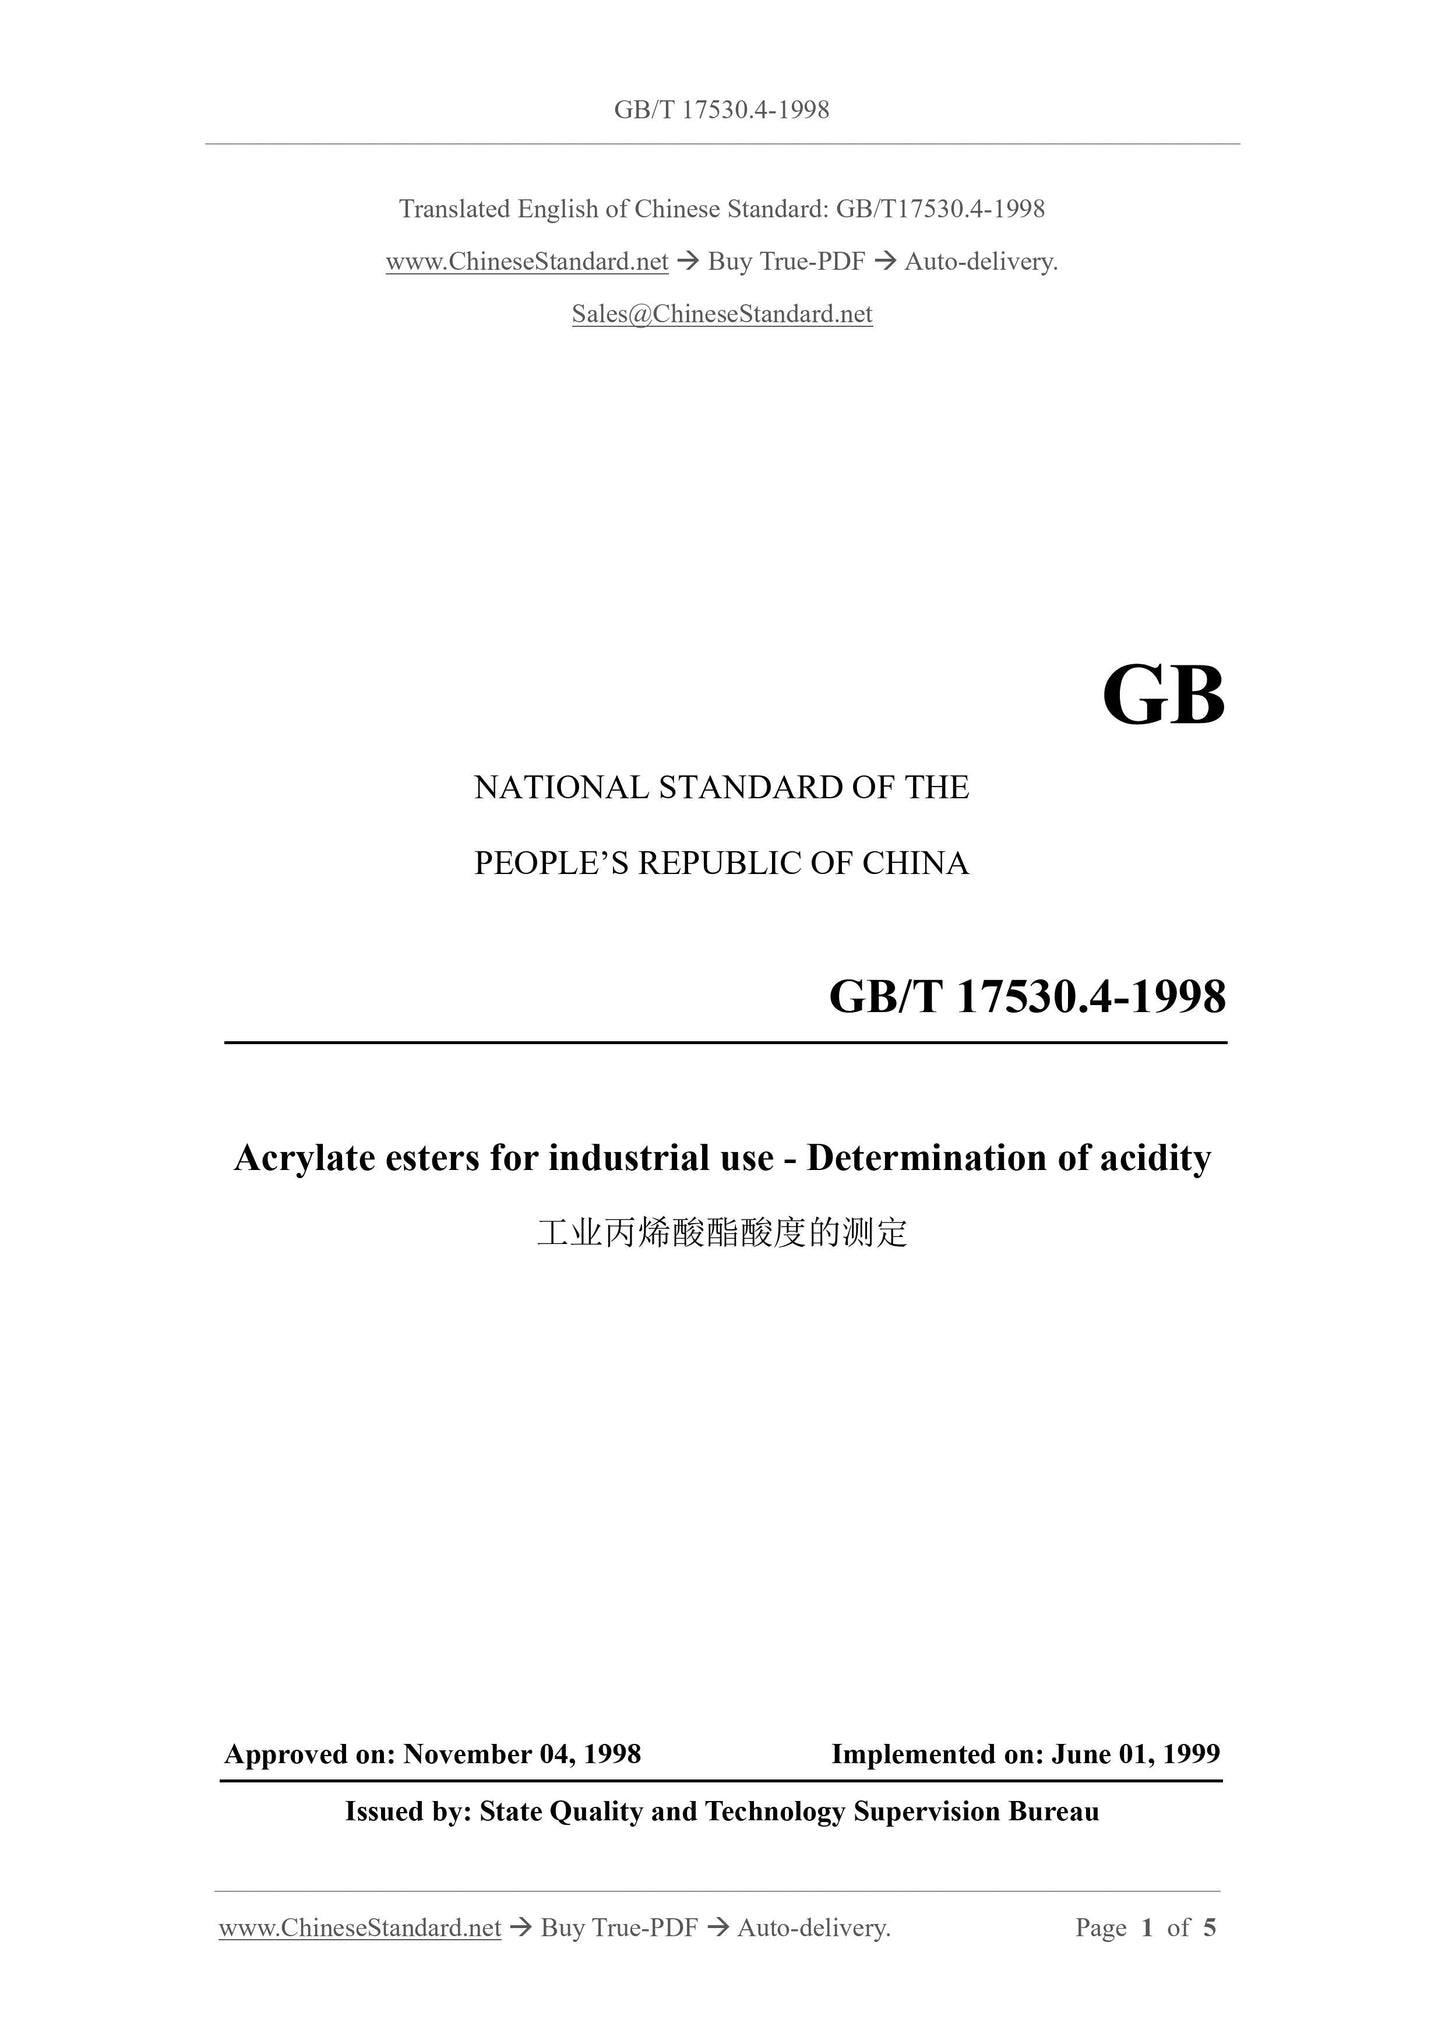 GB/T 17530.4-1998 Page 1